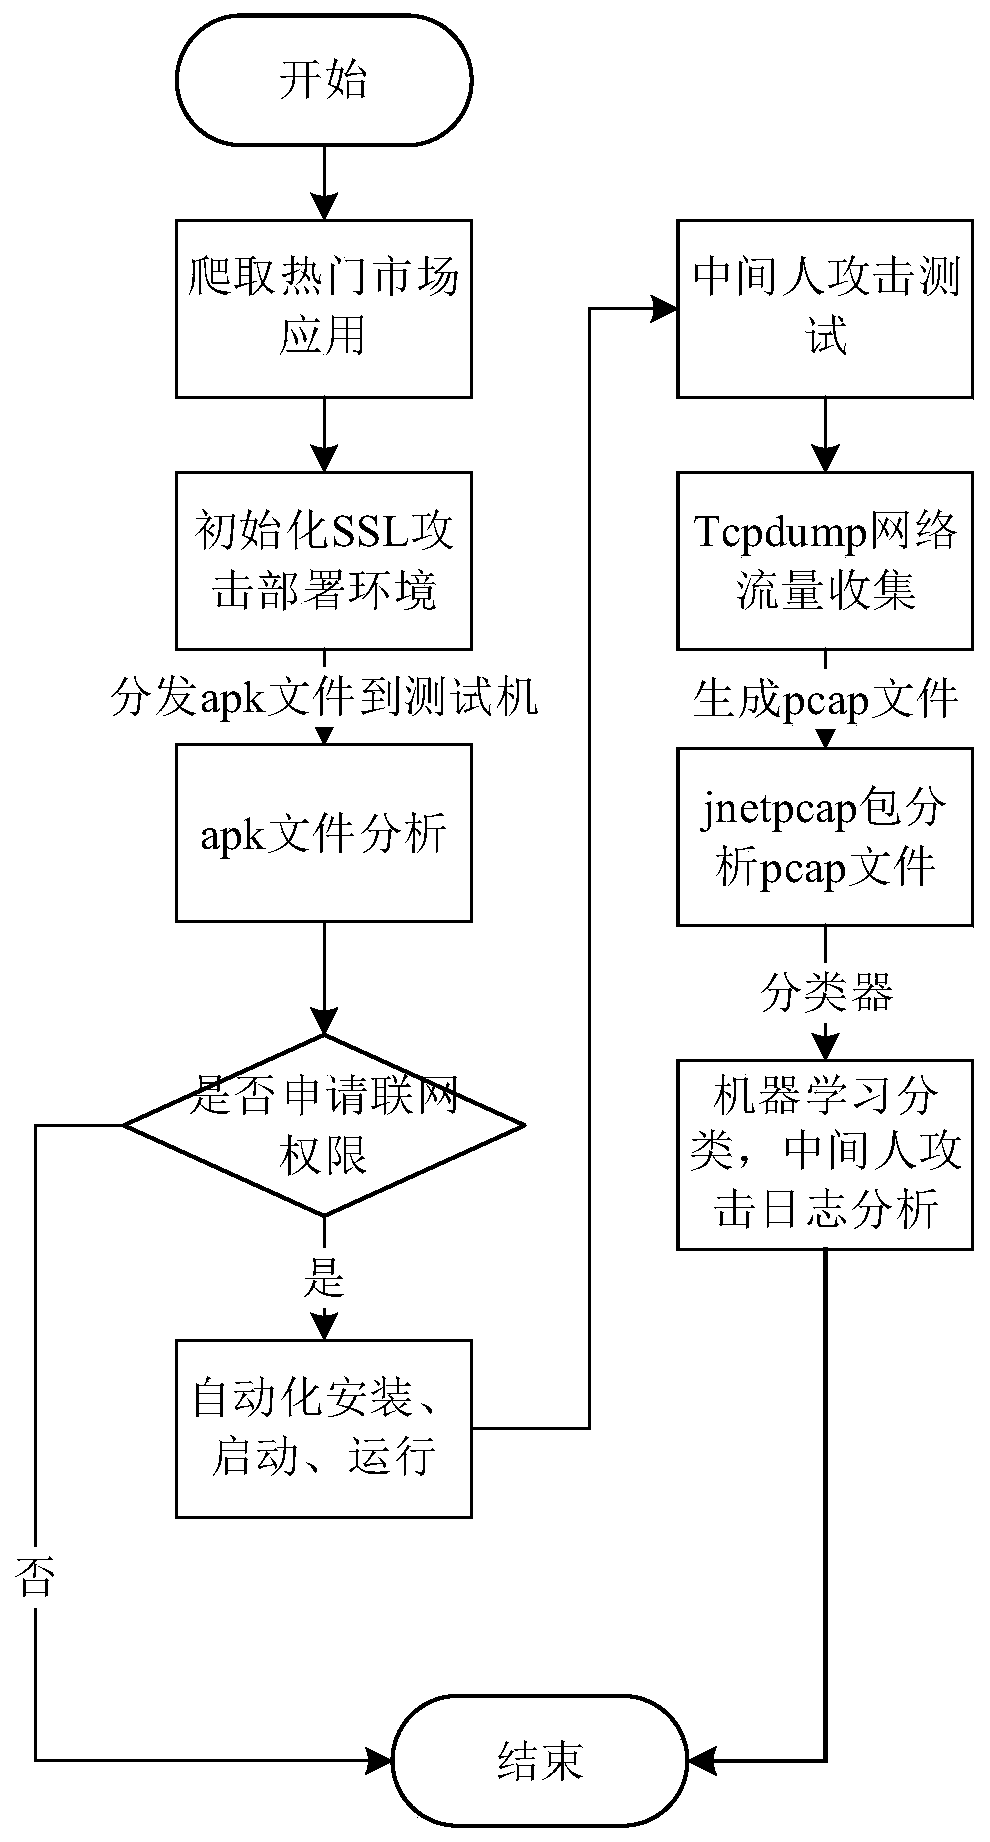 A privacy leak detection method and system in Android application network communication